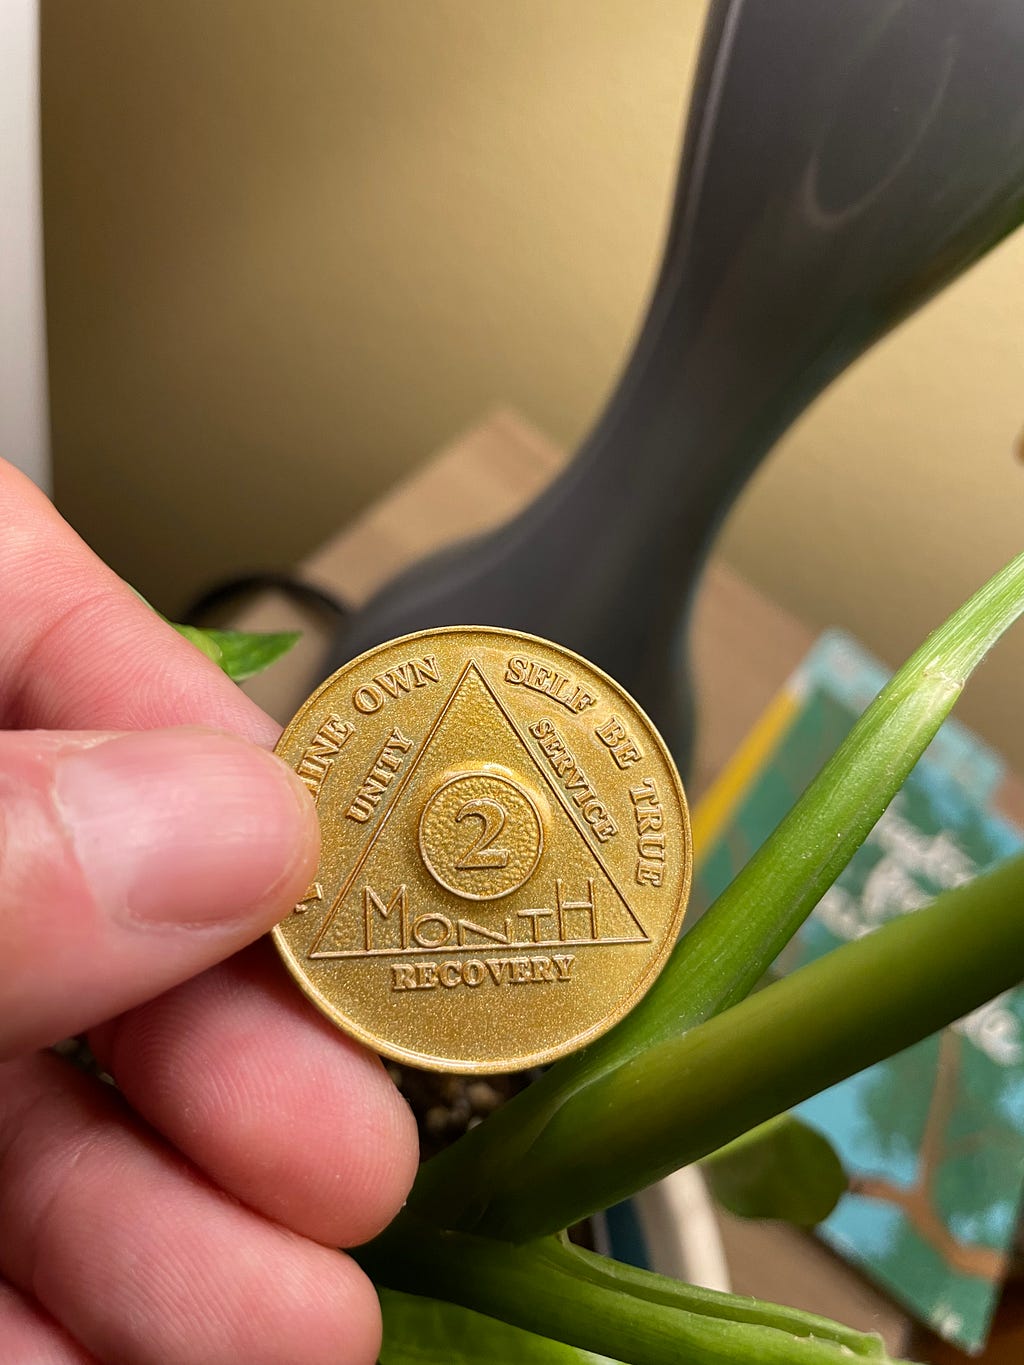 An Alcoholics Anonymous golden 2-month chip held next to a houseplant